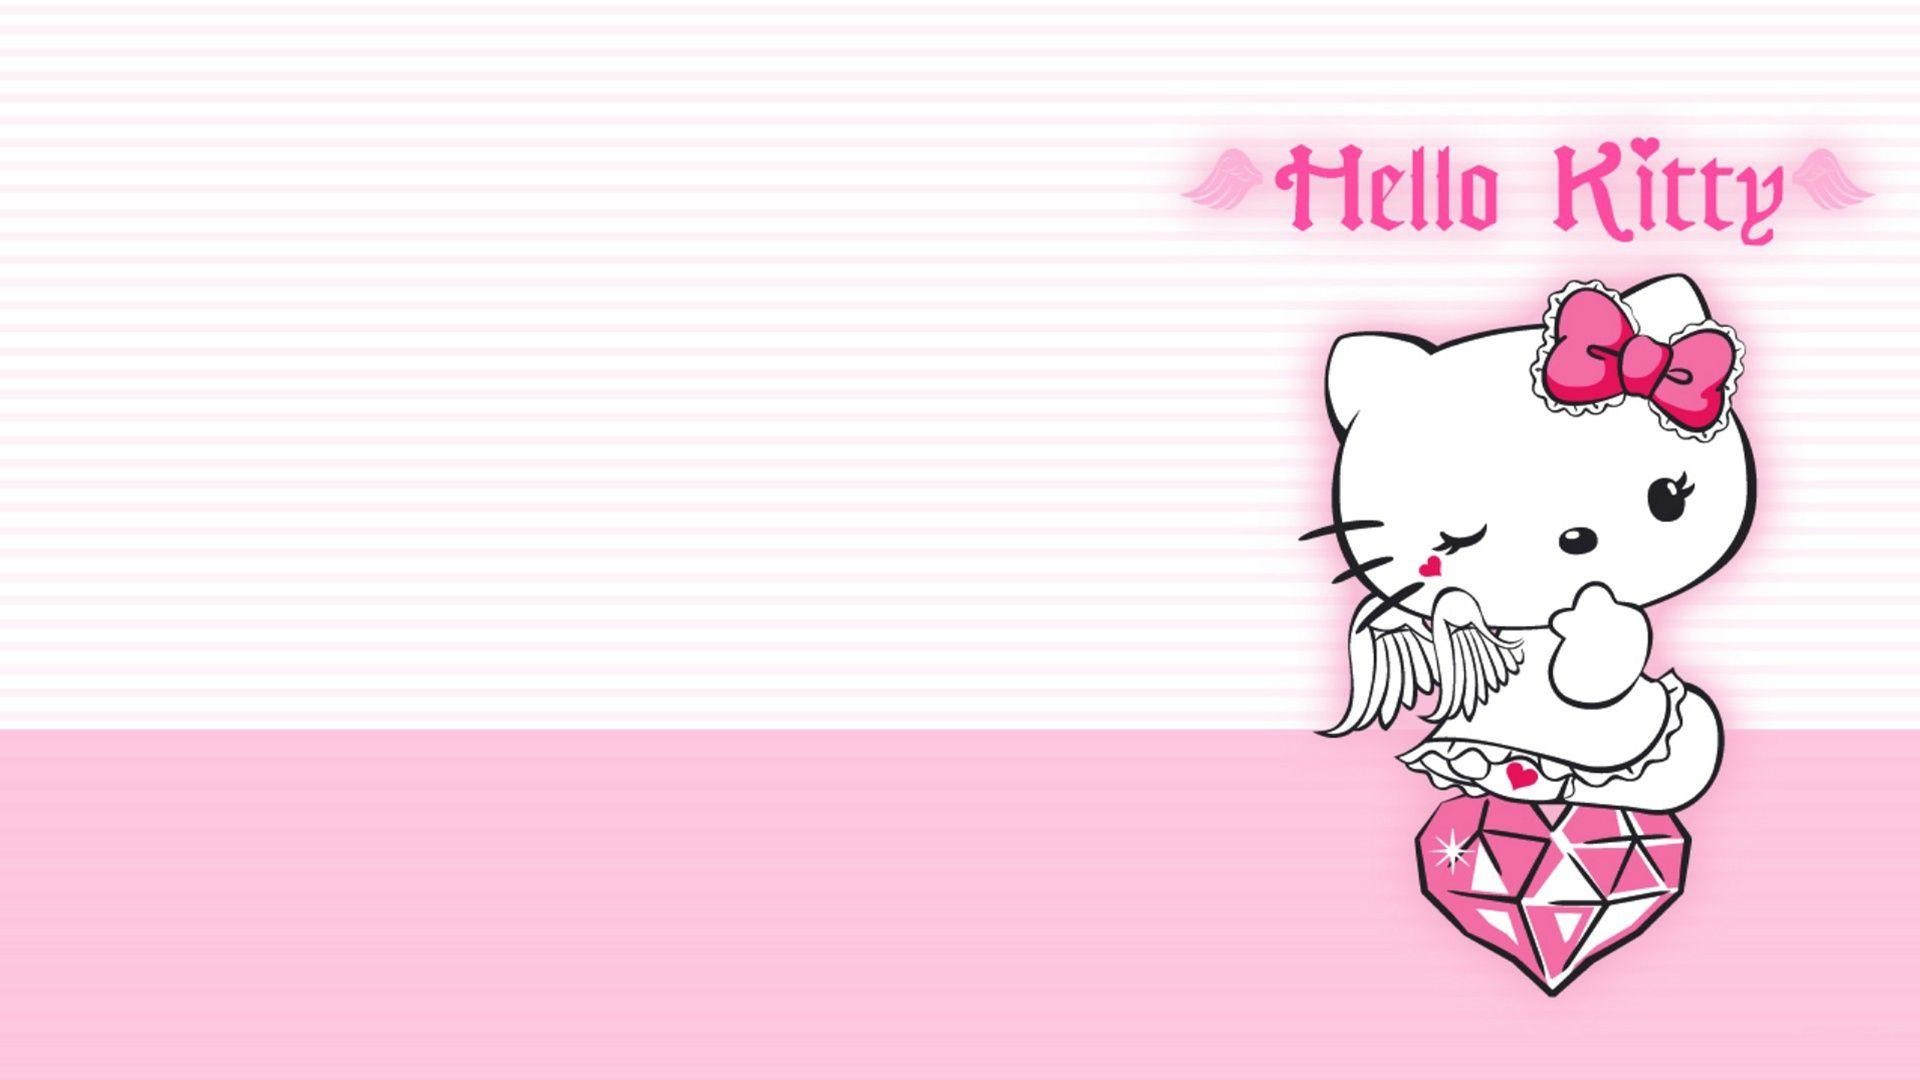 1920x1080 Wallpapers For > Black Hello Kitty Backgrounds For Computers